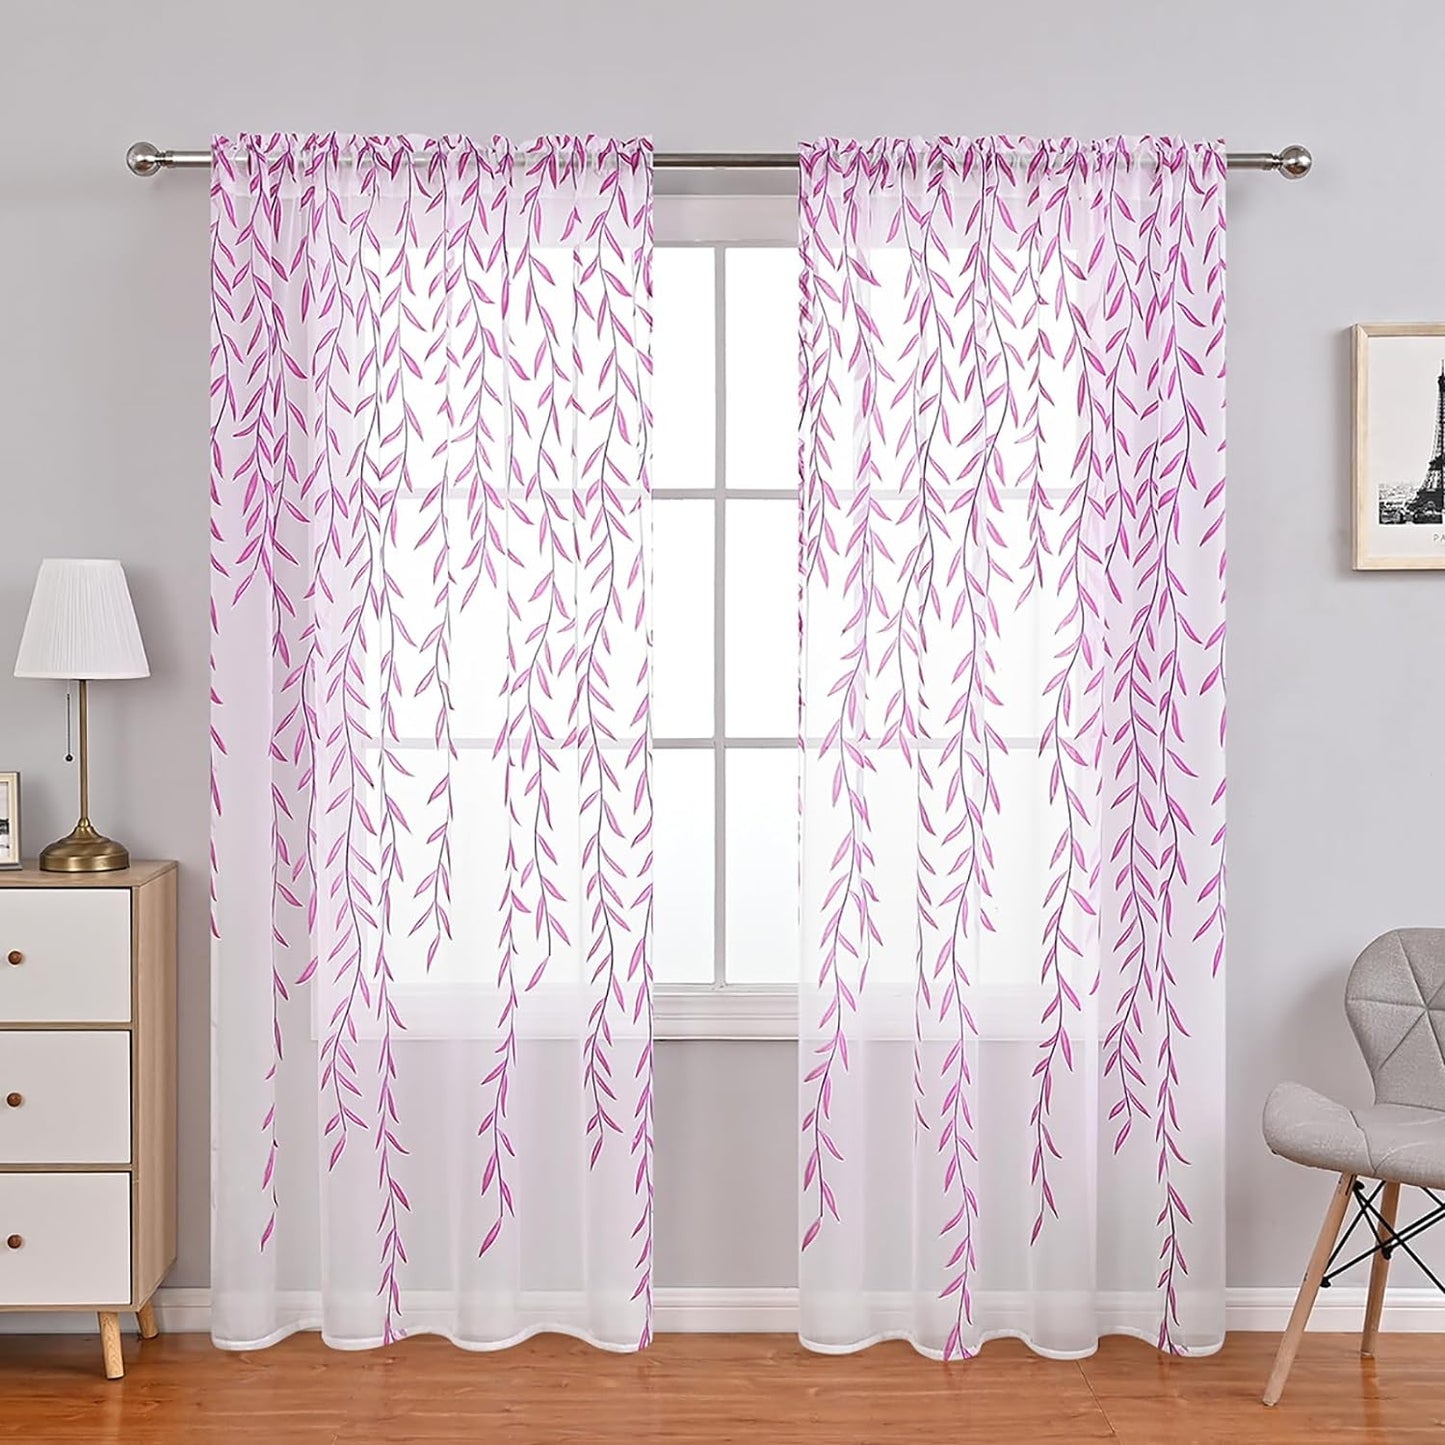 Ufurty Rely2016 Sunflower Window Curtain, 2PCS Sun Flower Floral Voile Sheer Curtain Panels Tulle Room Salix Leaf Sheer Gauze Curtain for Living Room, Bedroom, Balcony - Rod Pocket Top (100 X 200)  Rely2016 Purple 100*200Cm 